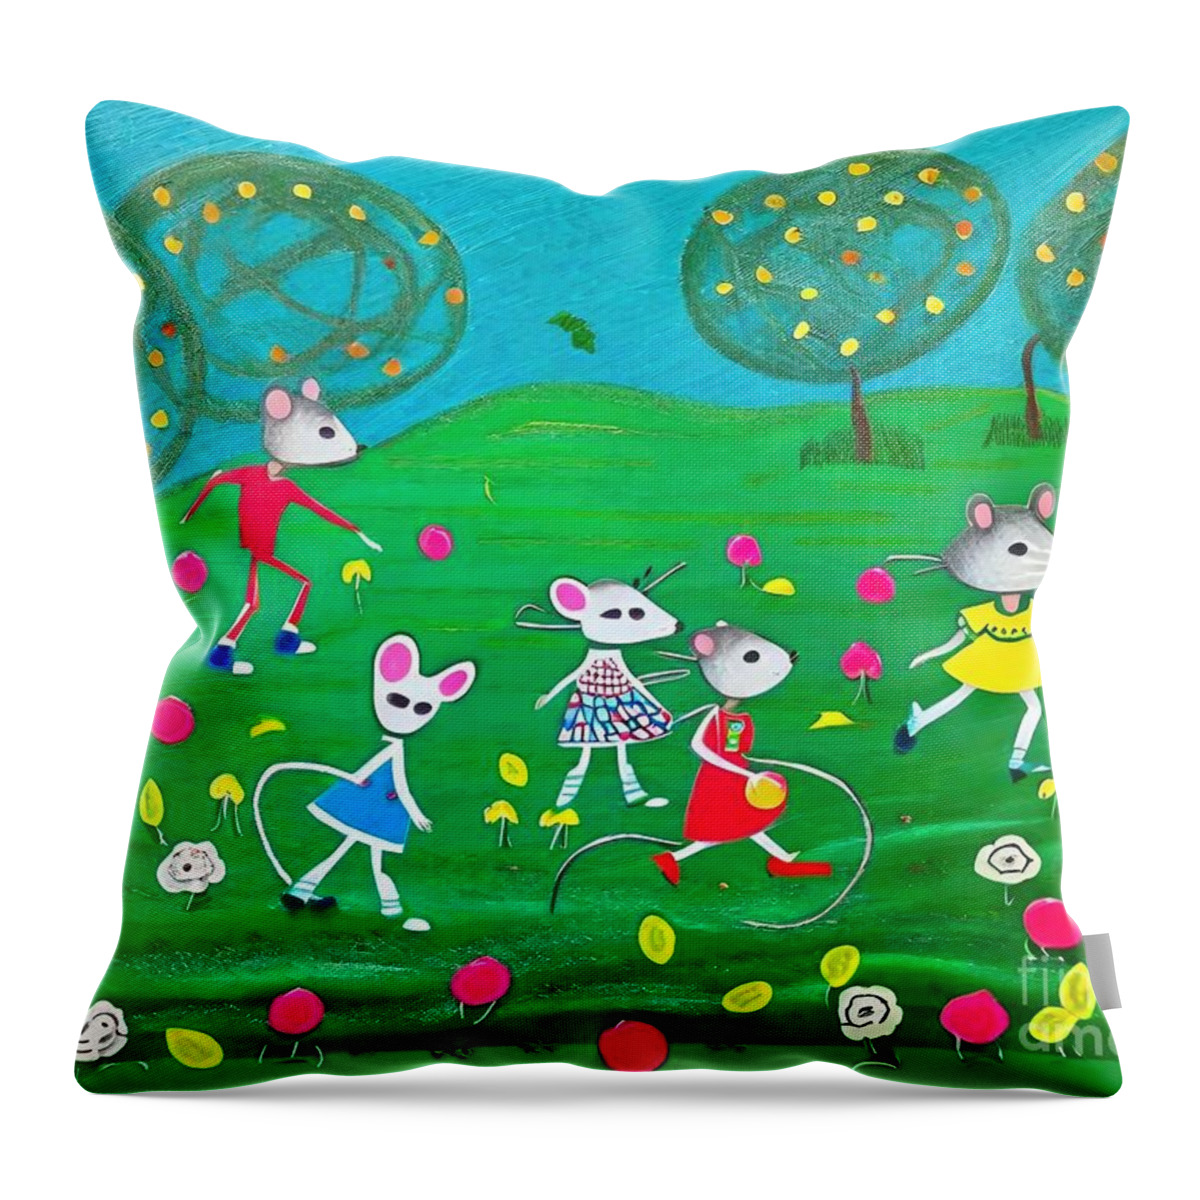 Happy Throw Pillow featuring the painting Painting Let S Have A Fun happy art illustration by N Akkash